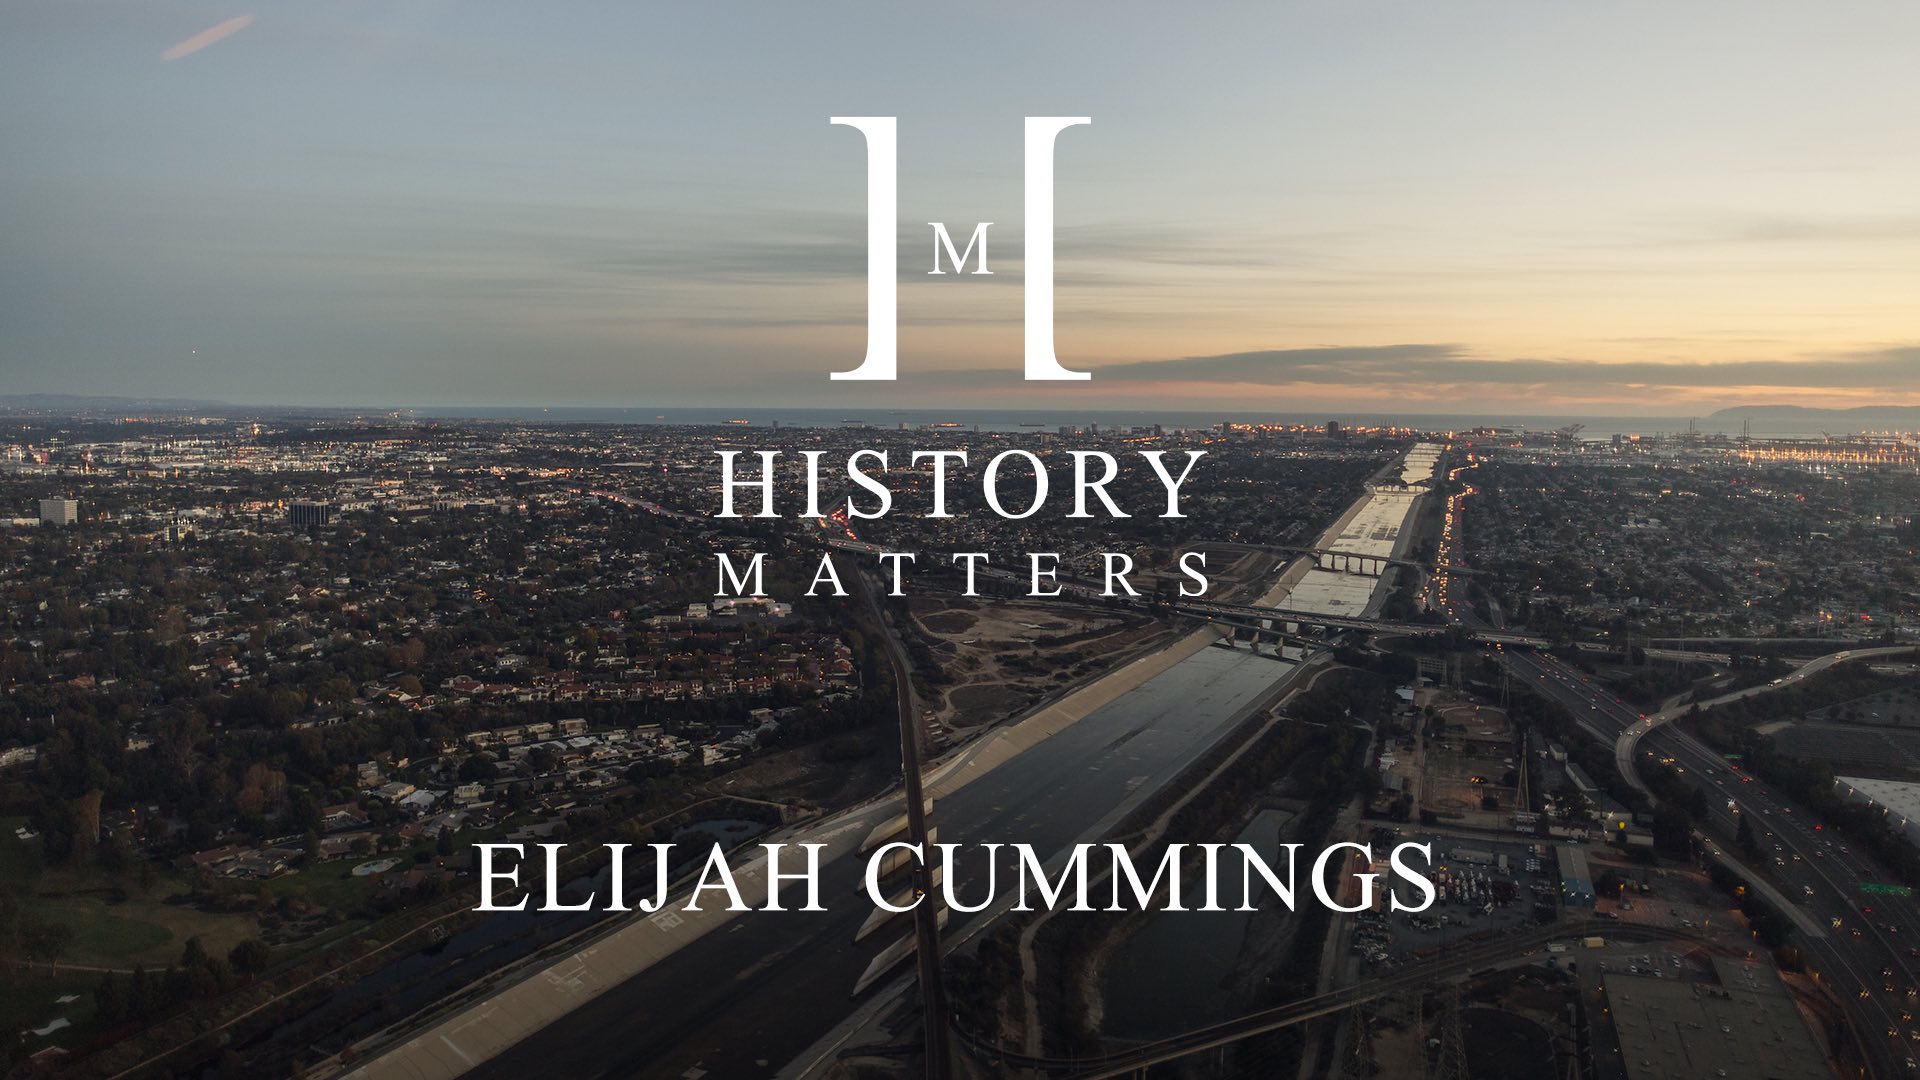 IU C&I Studios Page White HM Elijah Cummings logo with background aerial view of city with bridges crossing a waterway